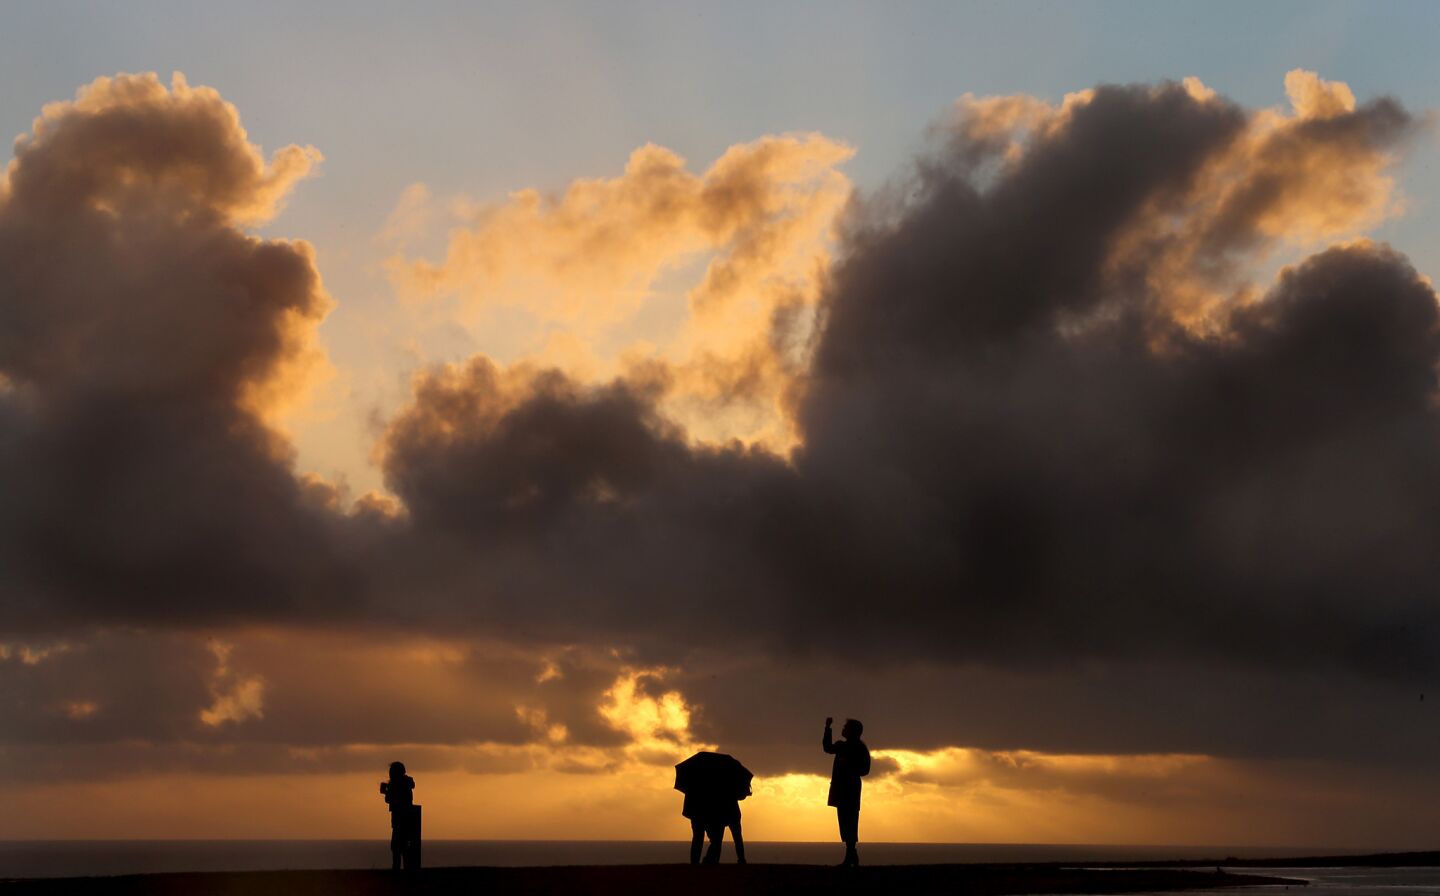 Visitors to Angels Gate Park in San Pedro are framed between the sea and sun-tinged clouds as the first storm of El Nino blows ashore.